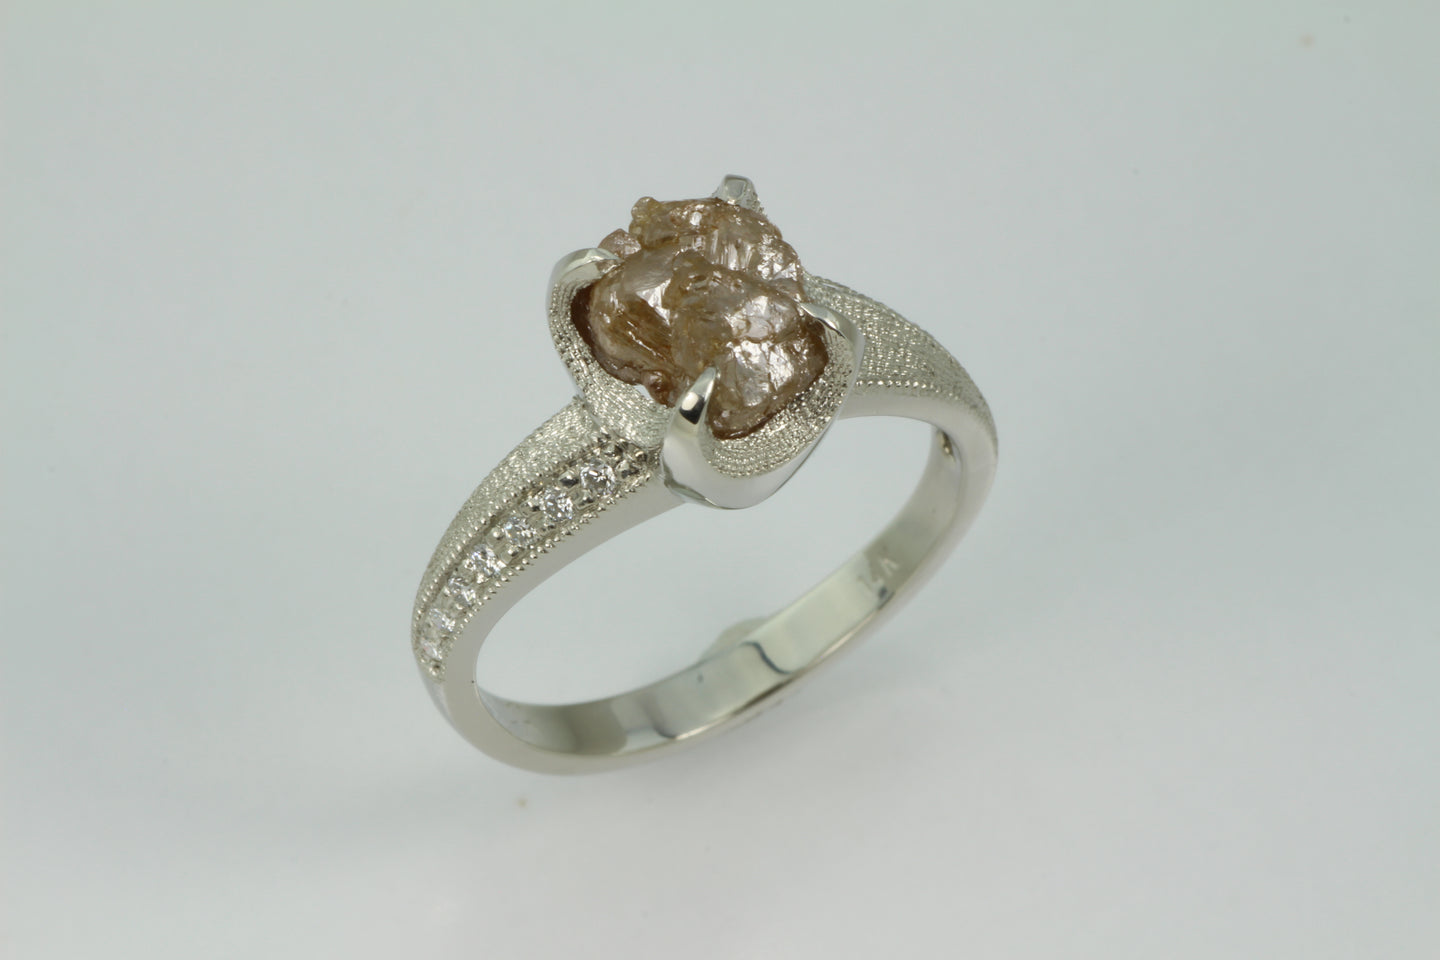 Natural colored diamond crystal and cut diamond engagement ring